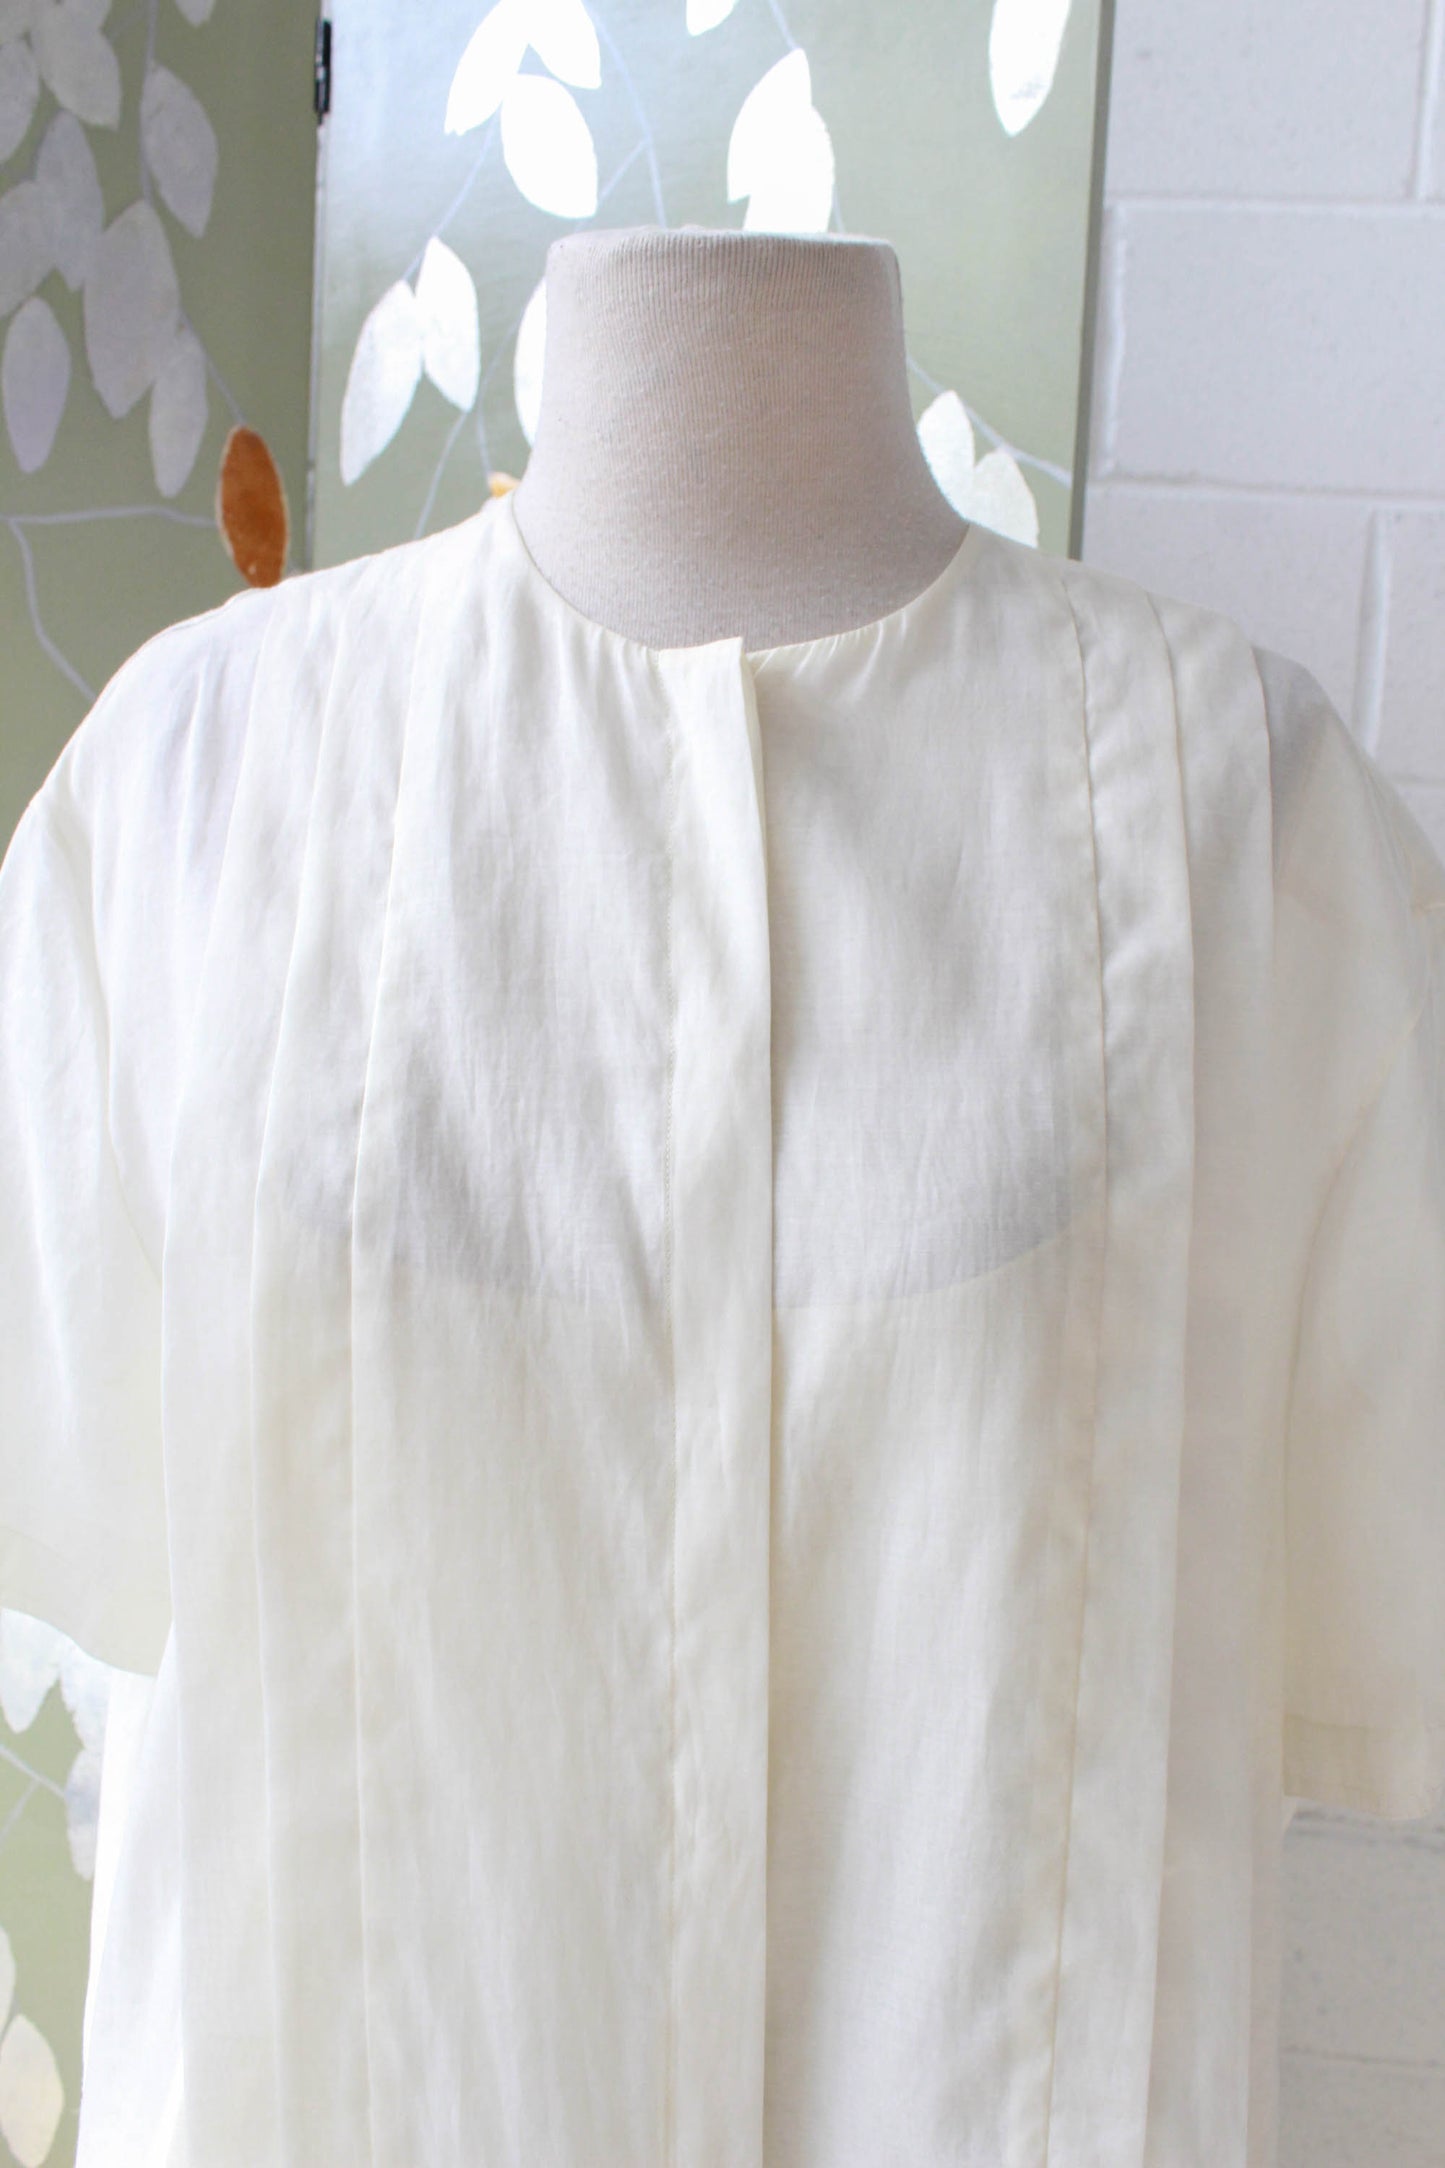 The Row Silk Button Up Shirt, Collarless, Short Sleeves, Pleated Front Design Minimalist Designer White Blouse